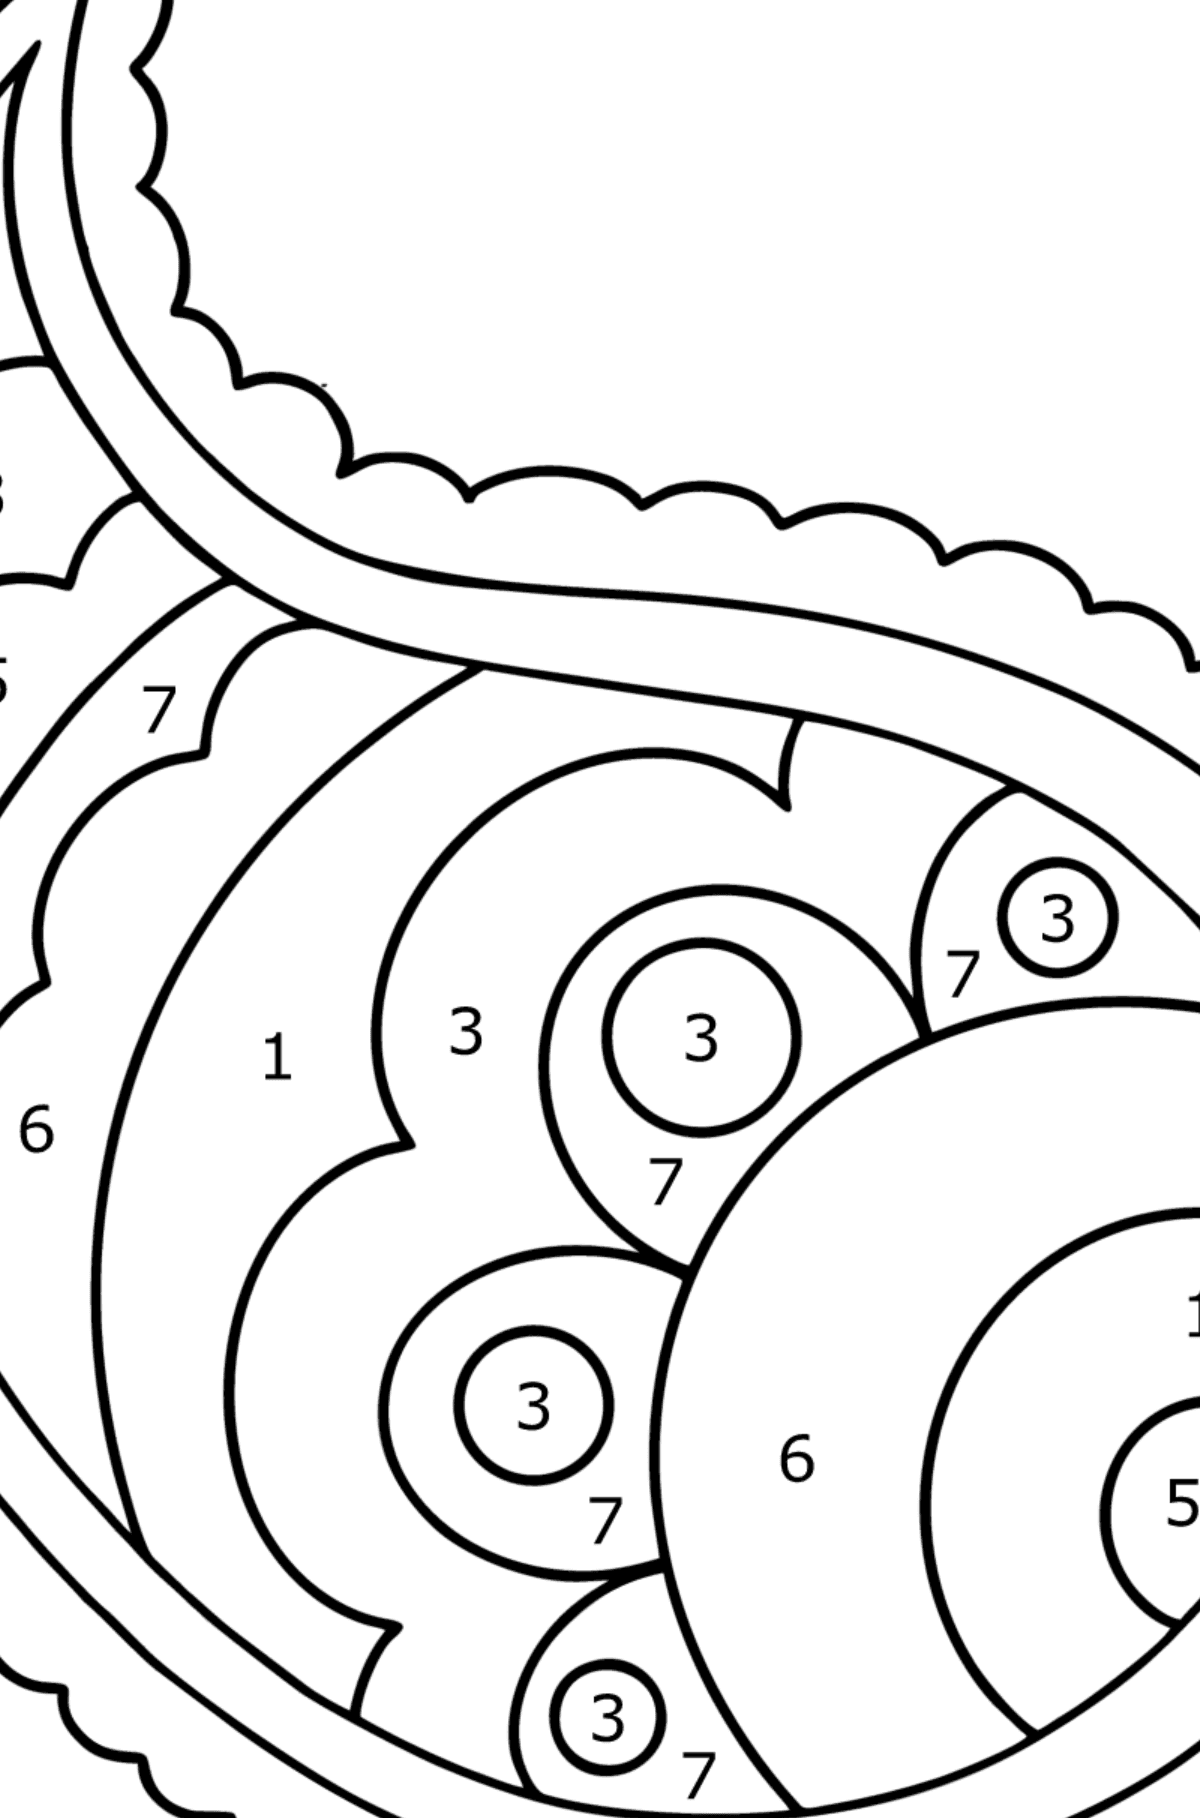 Paisley coloring page - 17 Elements - Coloring by Numbers for Kids